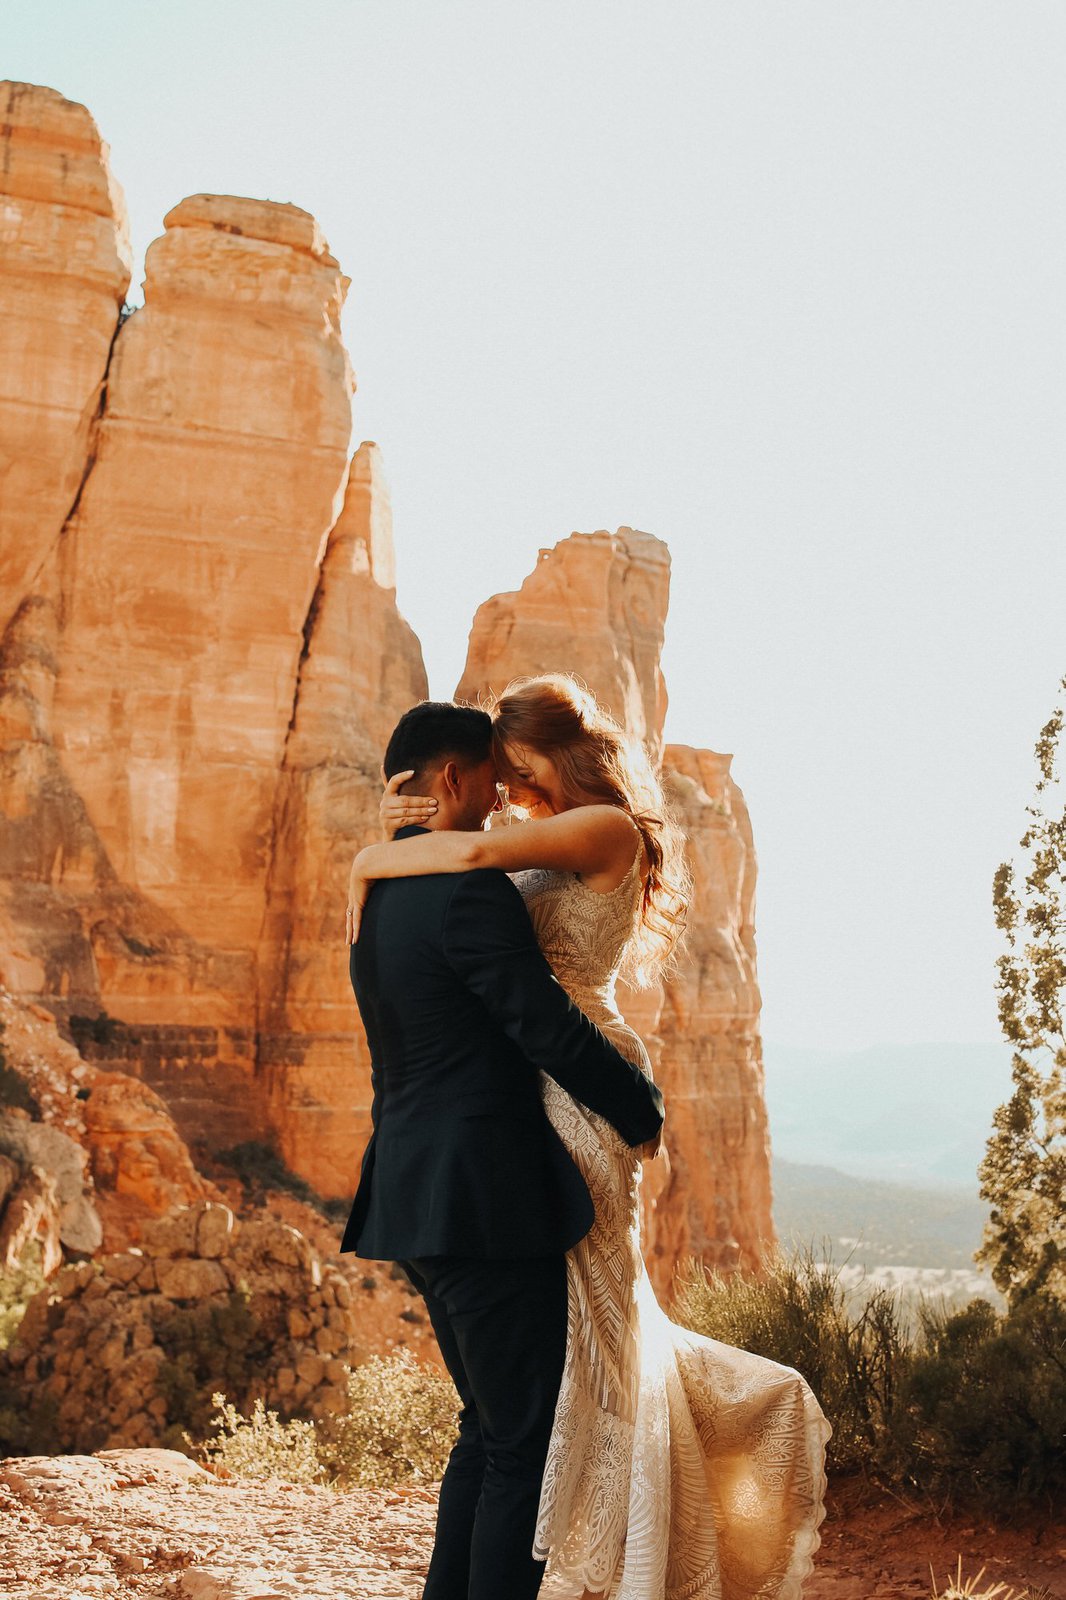 Couple portraits at Cathedral rock in Arizona.